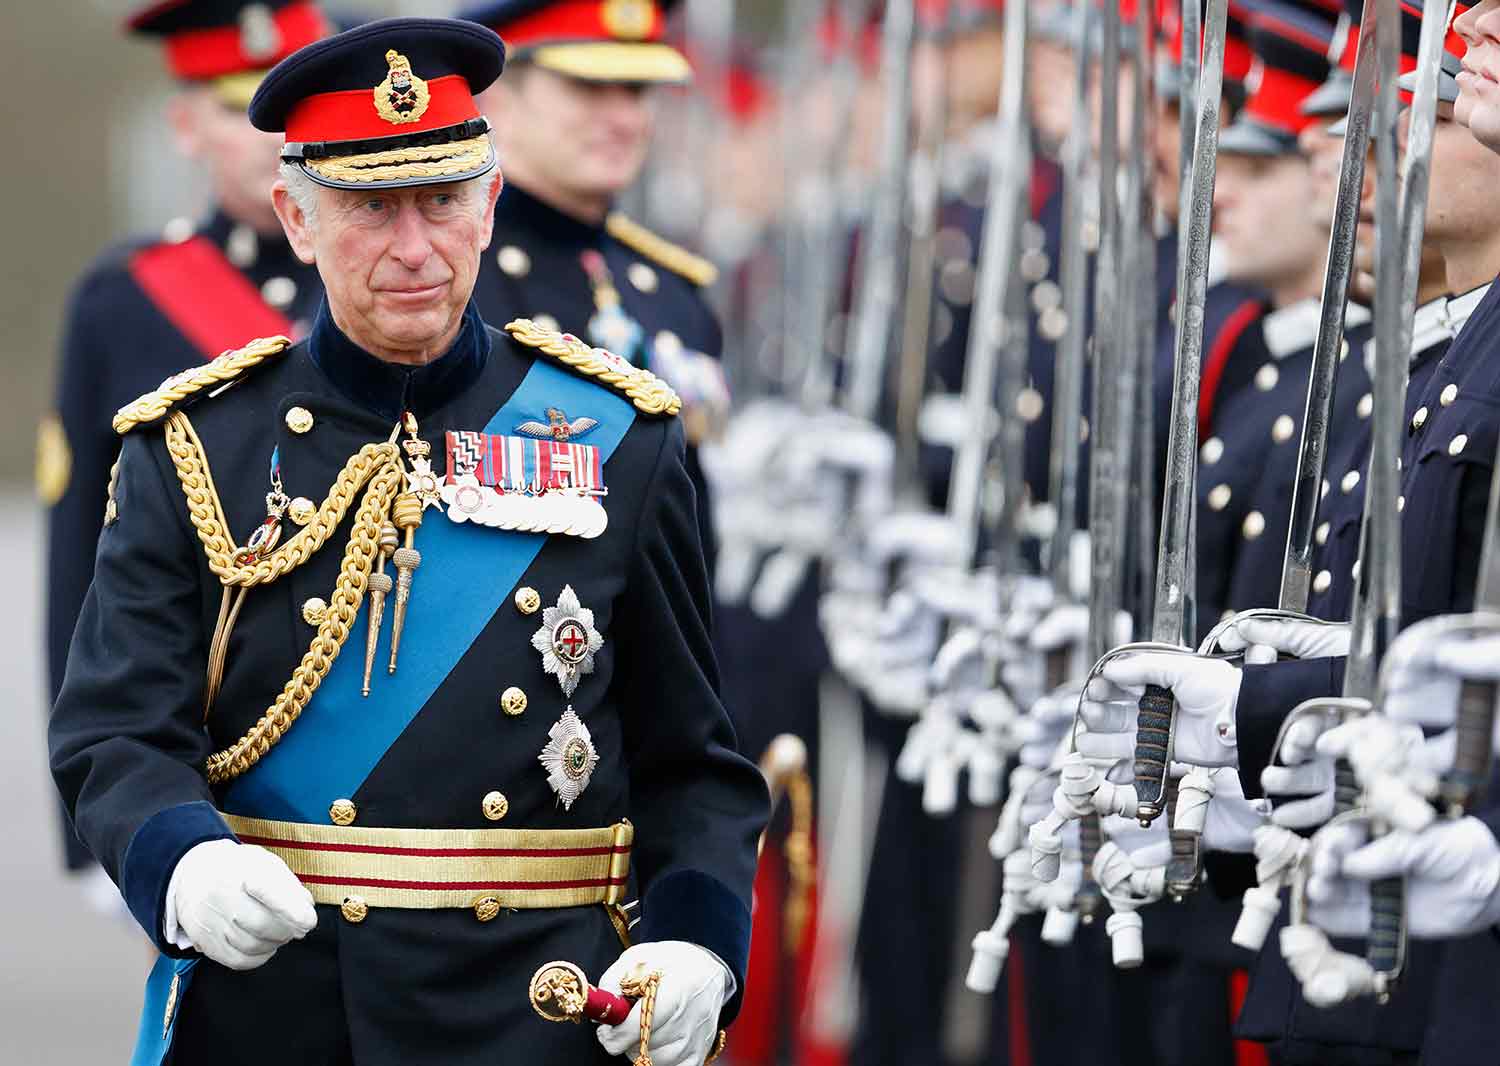 King Charles in uniform inspecting a line of soldiers holding up swords.